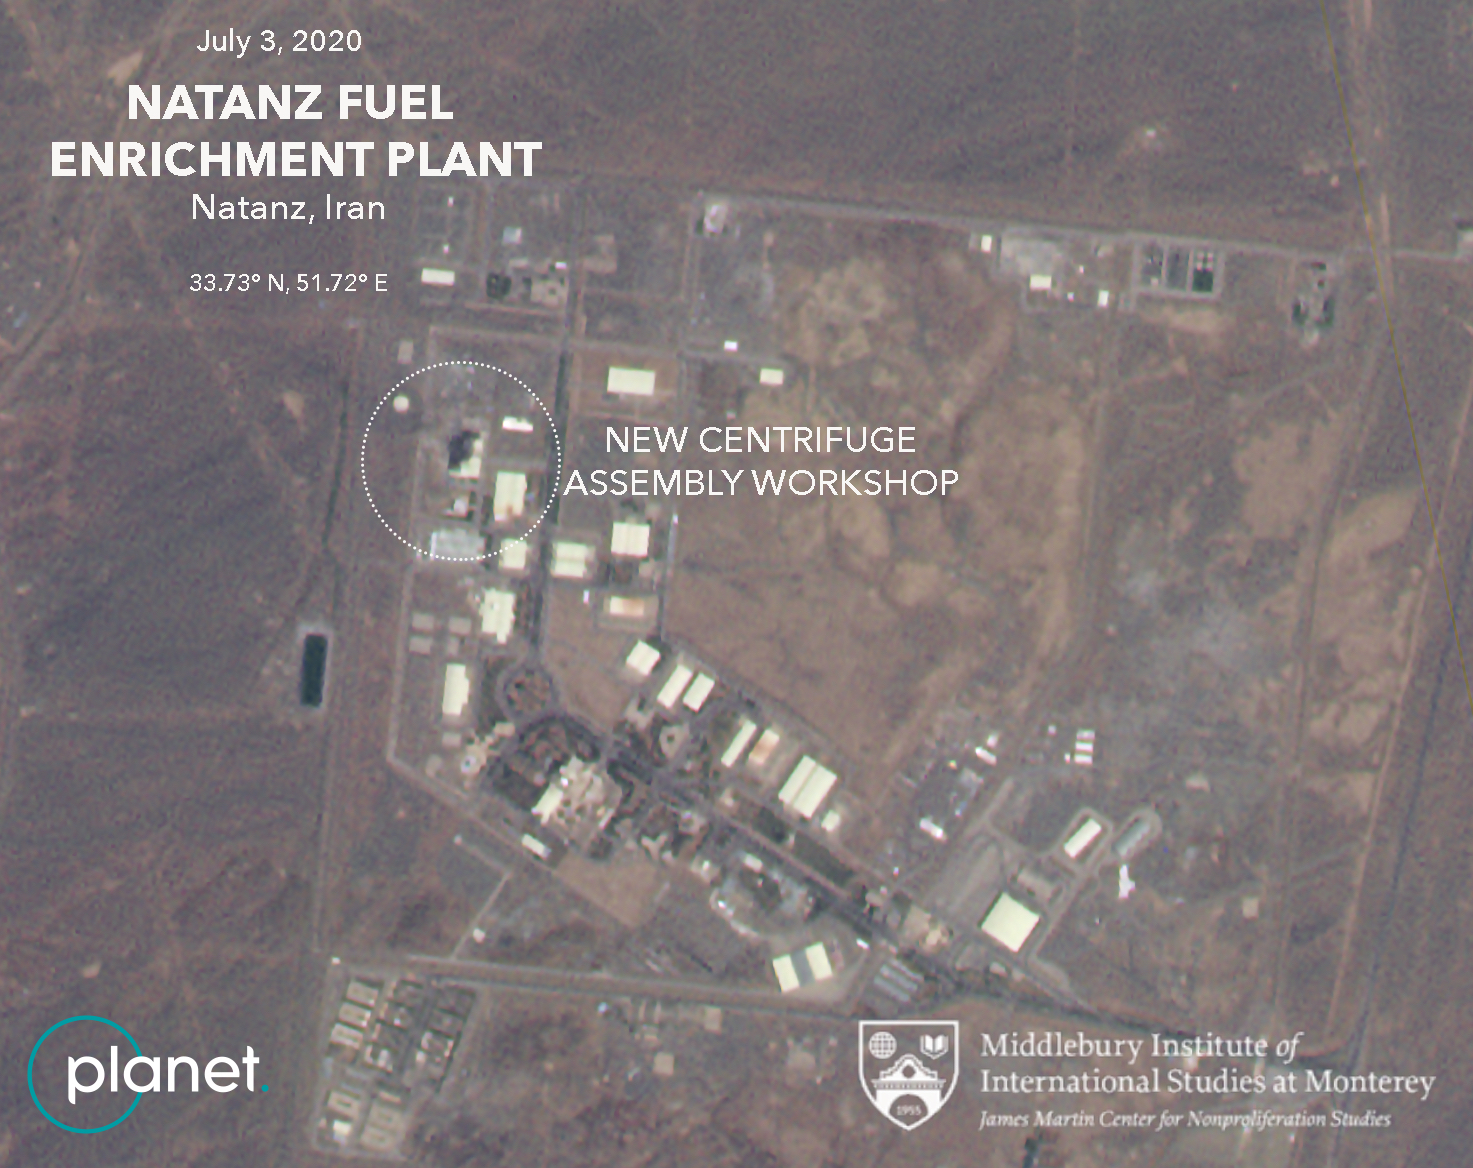 Serious damage due to Natanz nuclear site fire, admits Iran